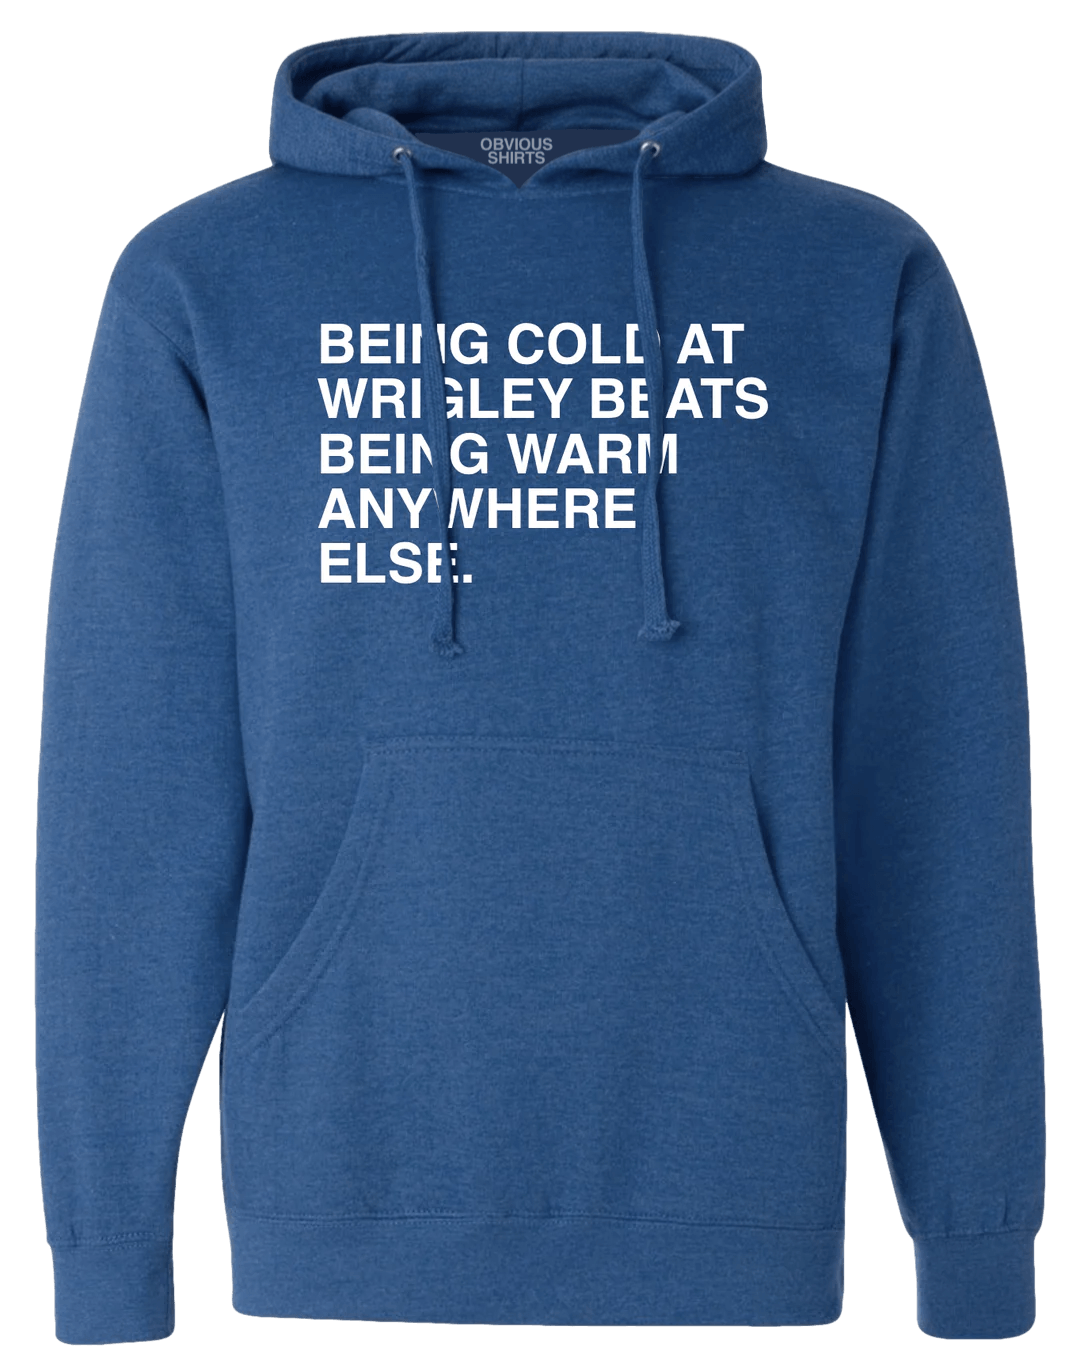 BEING COLD AT WRIGLEY. (HOODED SWEATSHIRT) - OBVIOUS SHIRTS